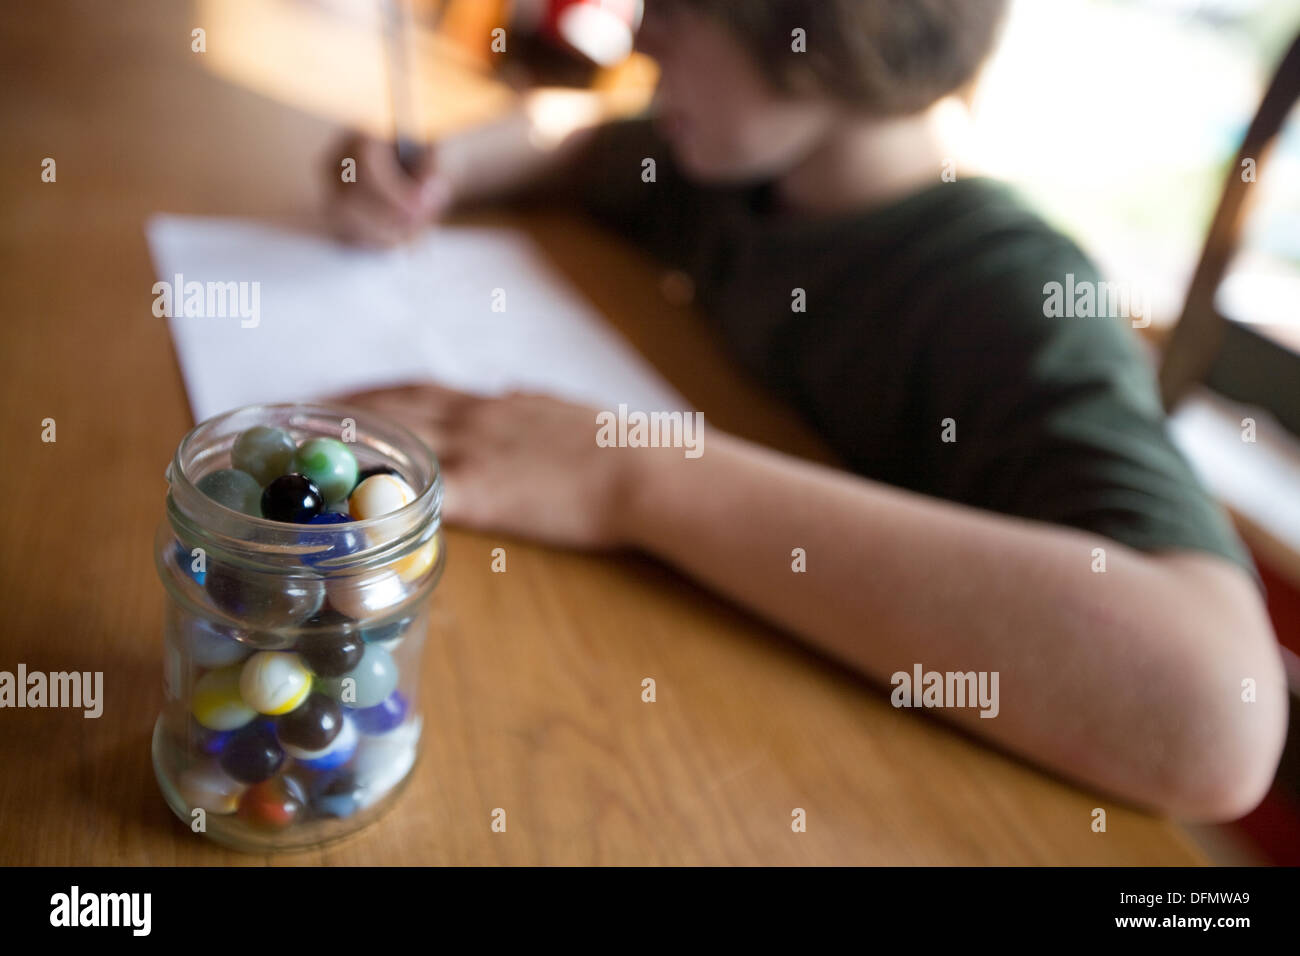 Boy concentrating on drawing at a table, a jar of marbles in foreground. Stock Photo